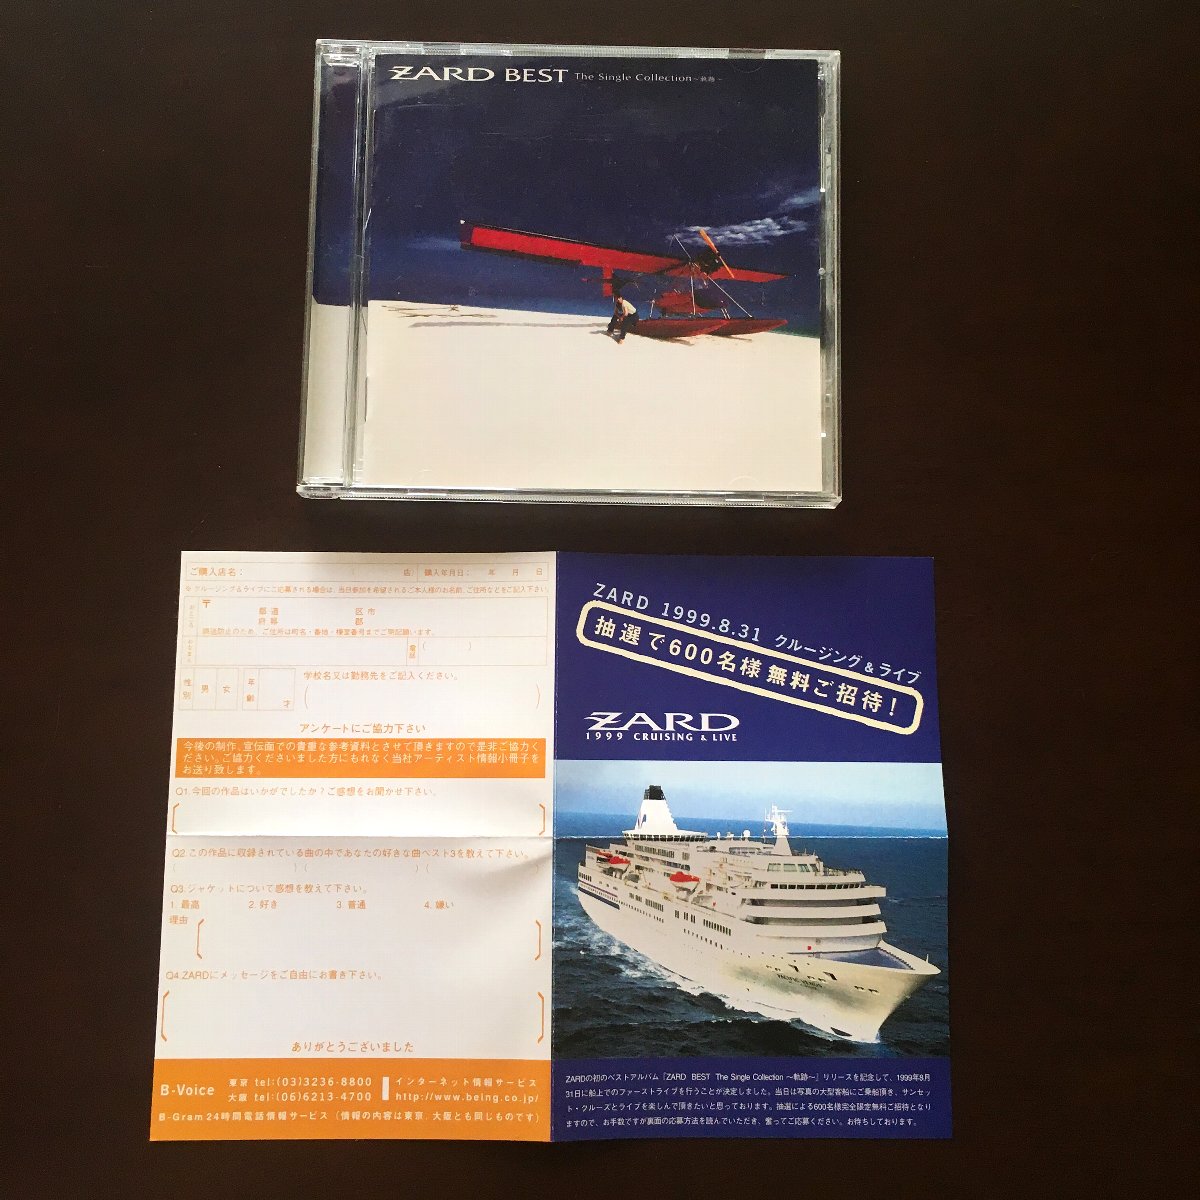 Zard Cruising Live Application Postcard Attaching Best The Single Collection Trajectory The Best Album Cd Minus Not Swaying Real Yahoo Auction Salling